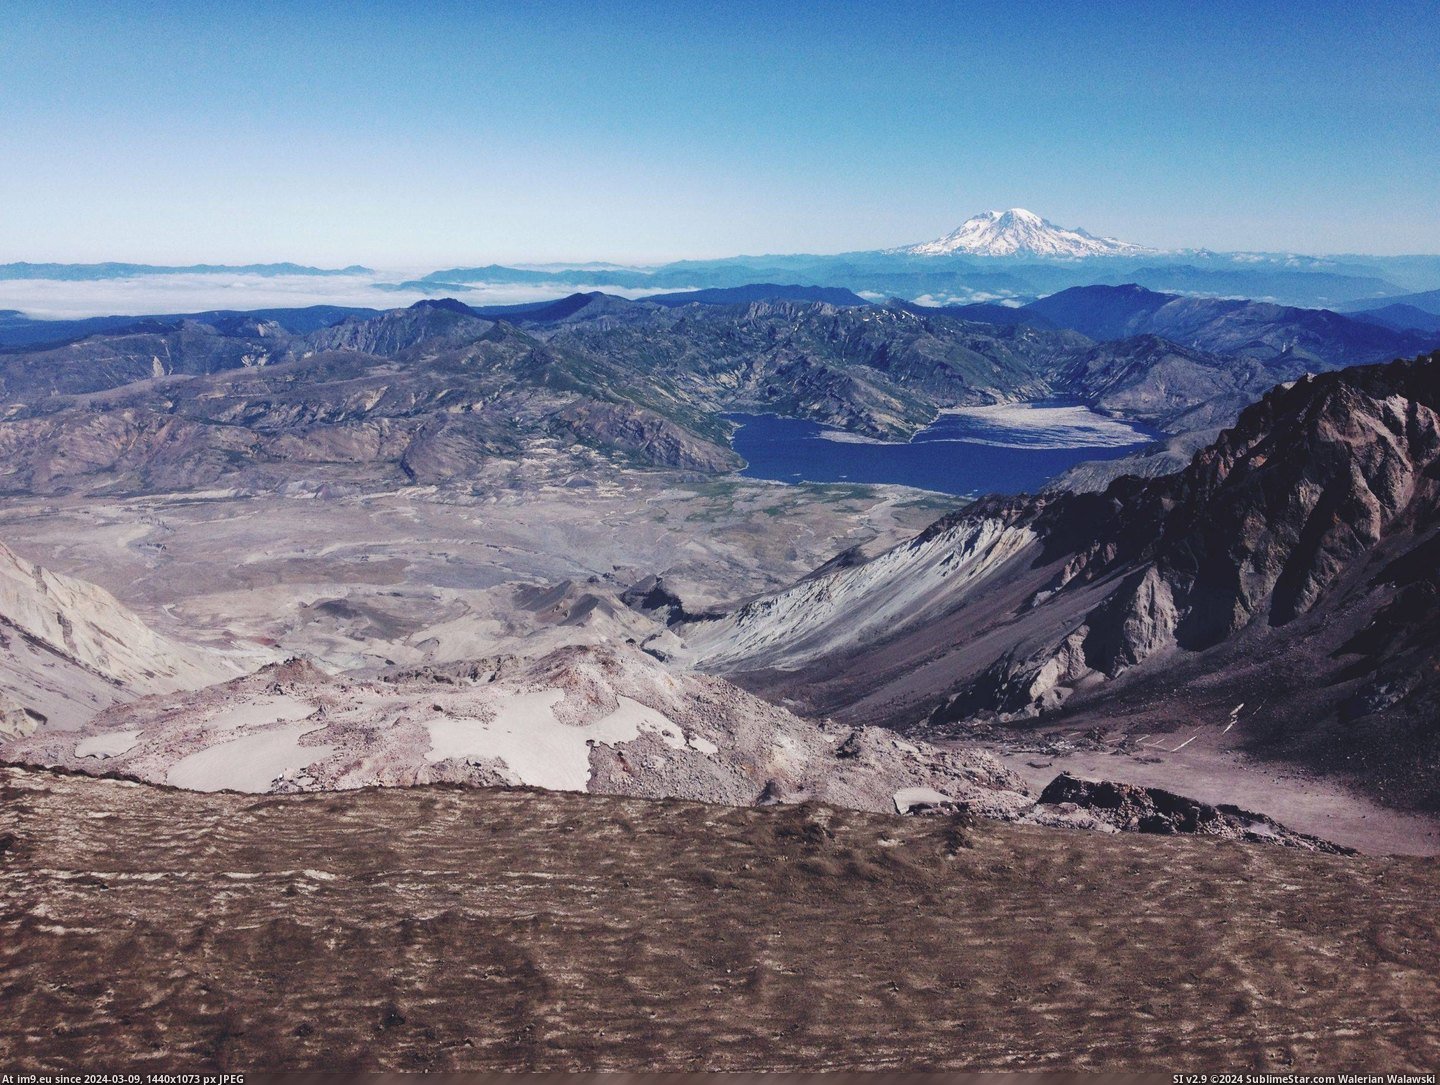 #Top #Mount #Helens #3264x2448 #Hike [Earthporn] Top of Mount St. Helens hike! [3264x2448] Pic. (Изображение из альбом My r/EARTHPORN favs))